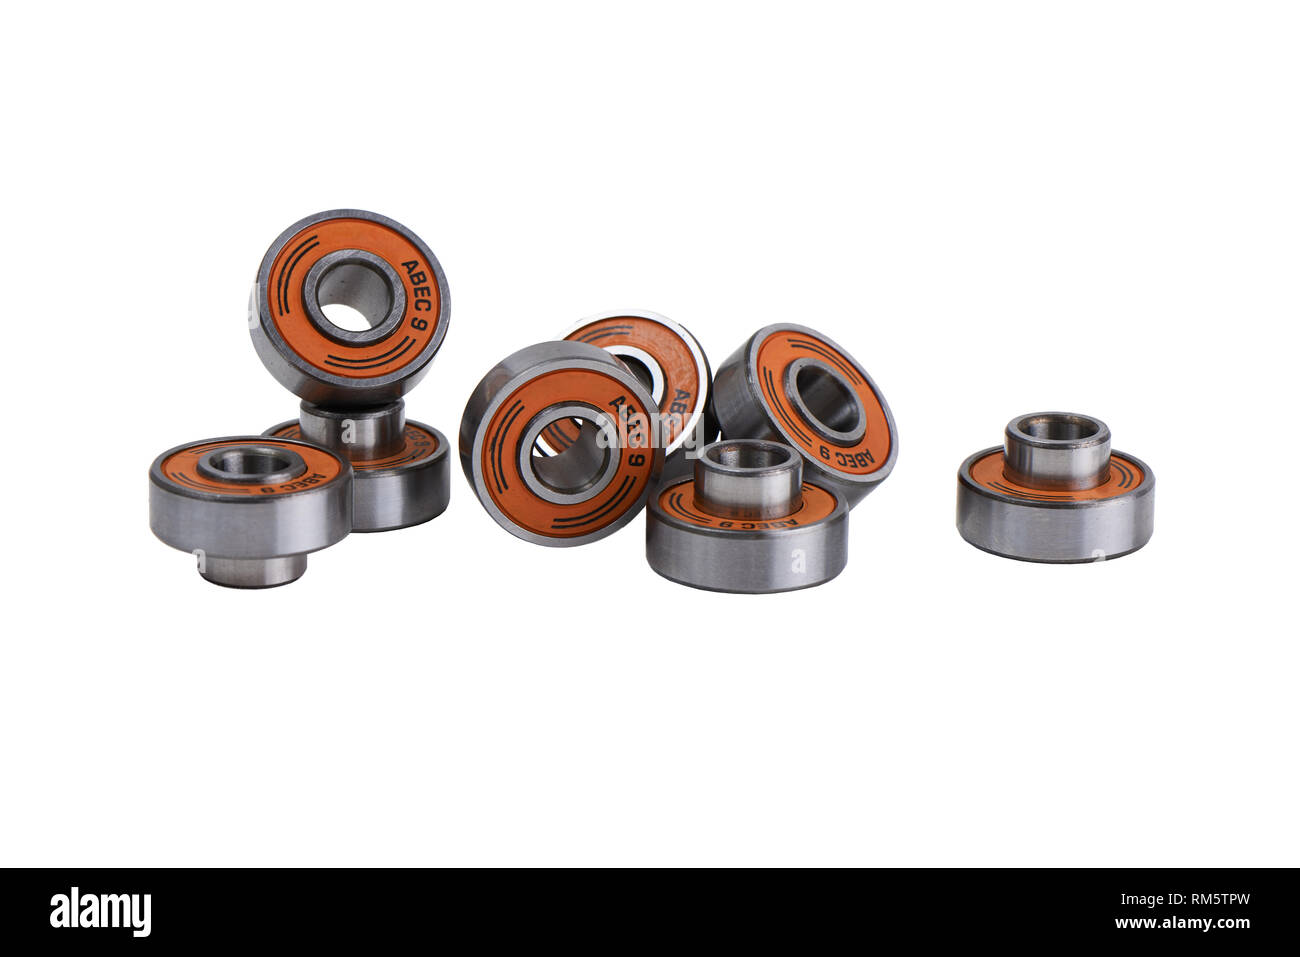 built-in spacer ABEC9 608 bearings for longboard or skateboard. Stock Photo